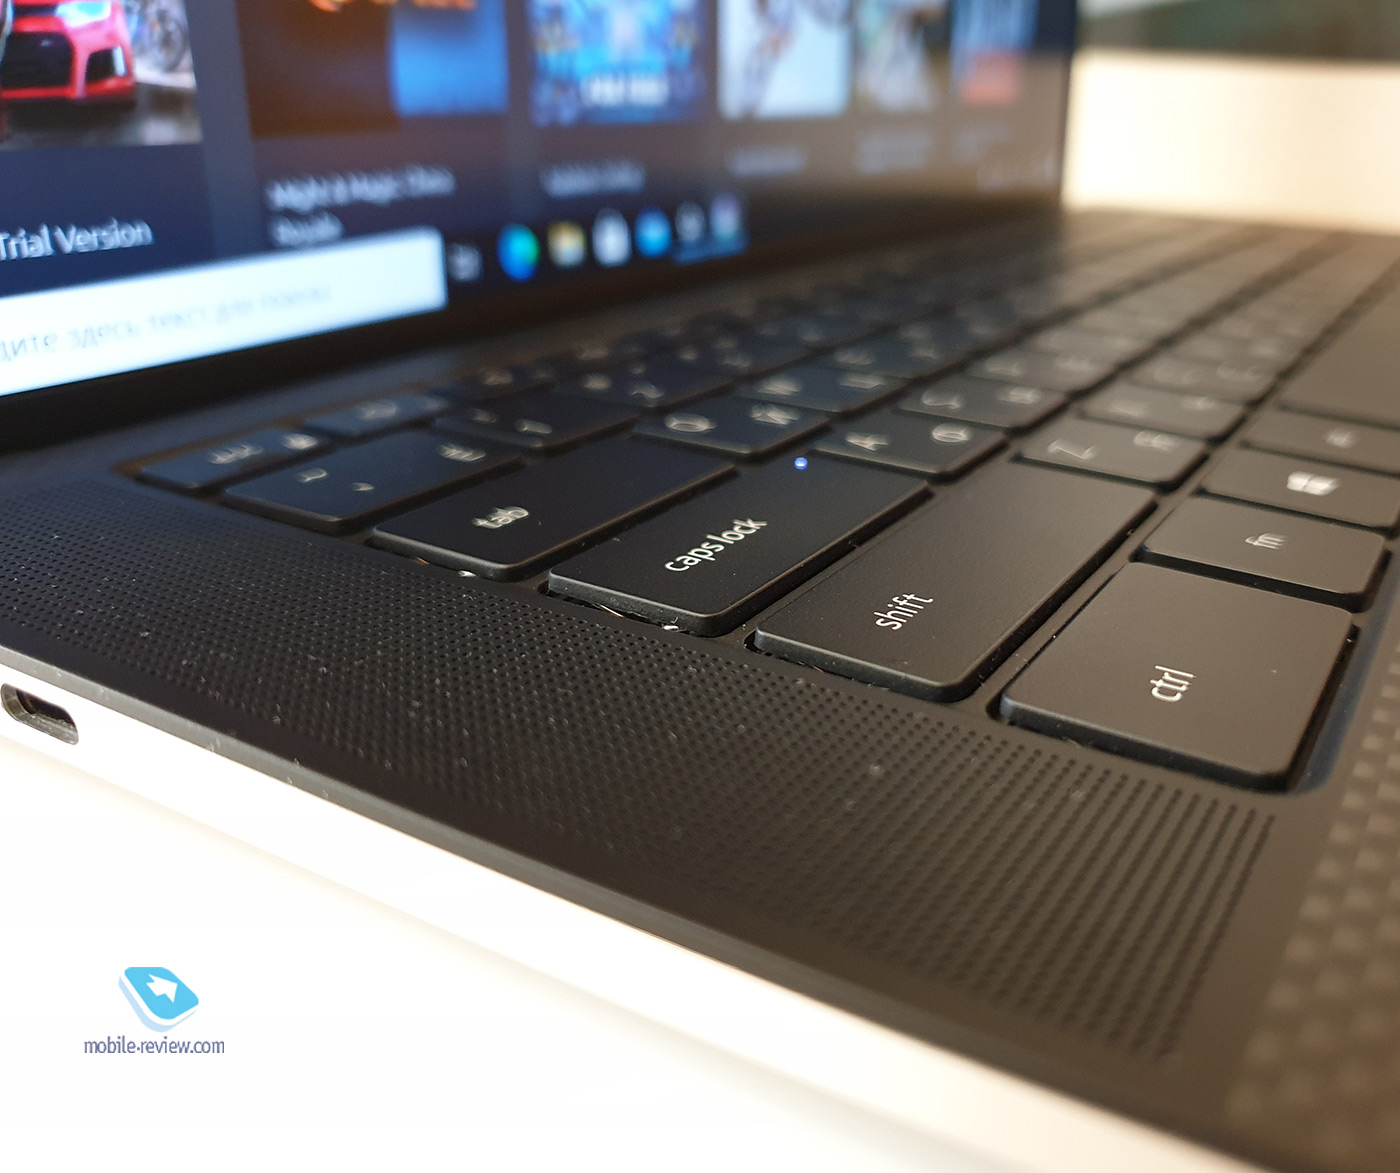  Dell XPS 15 9500:   2020 